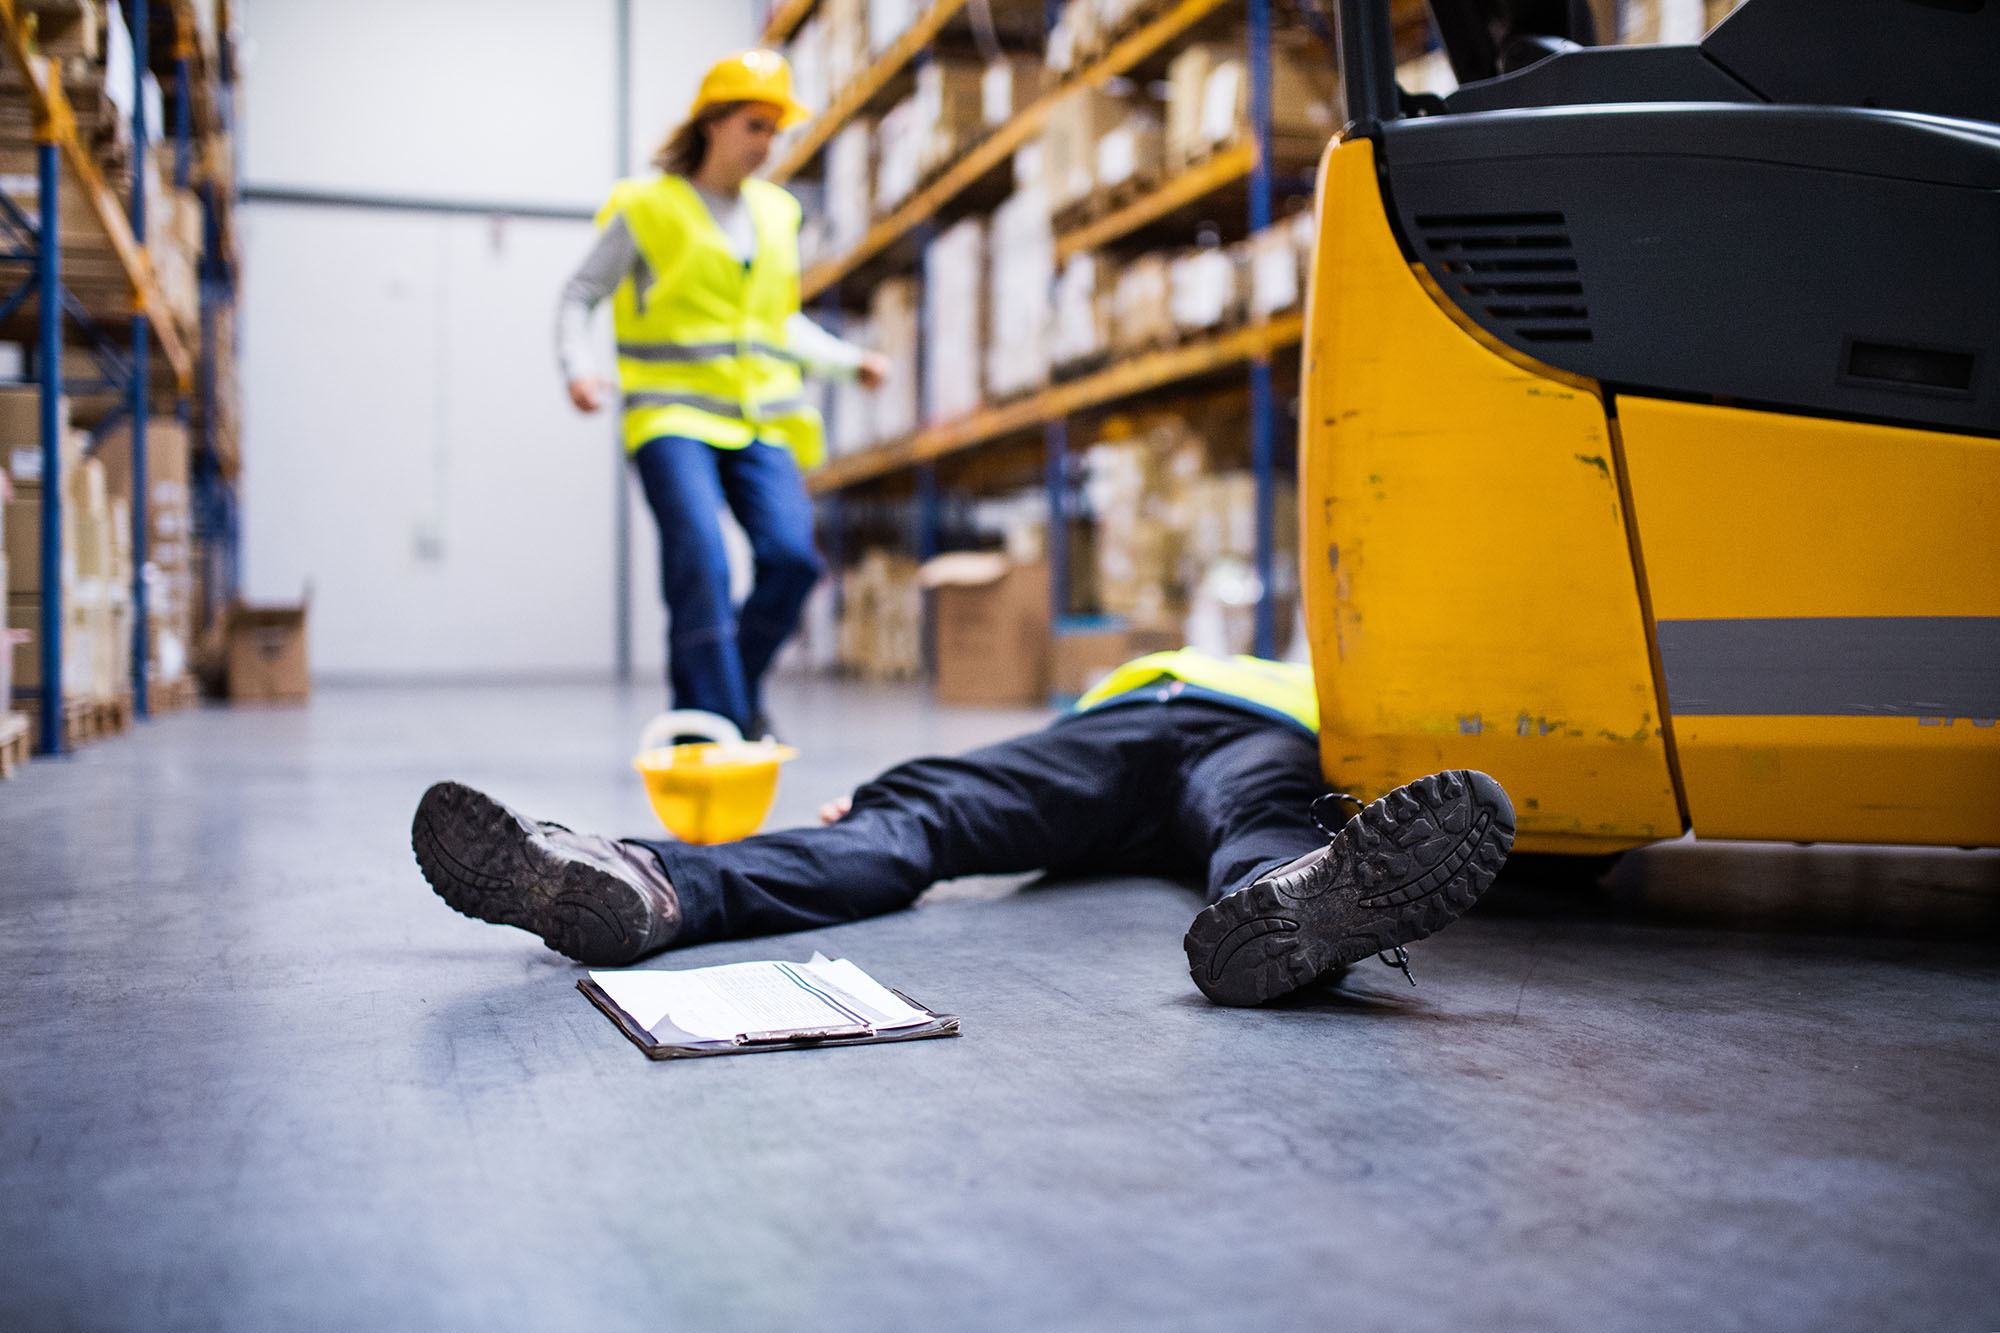 Employee Found Fatally Injured by Side Loading Forklift Truck